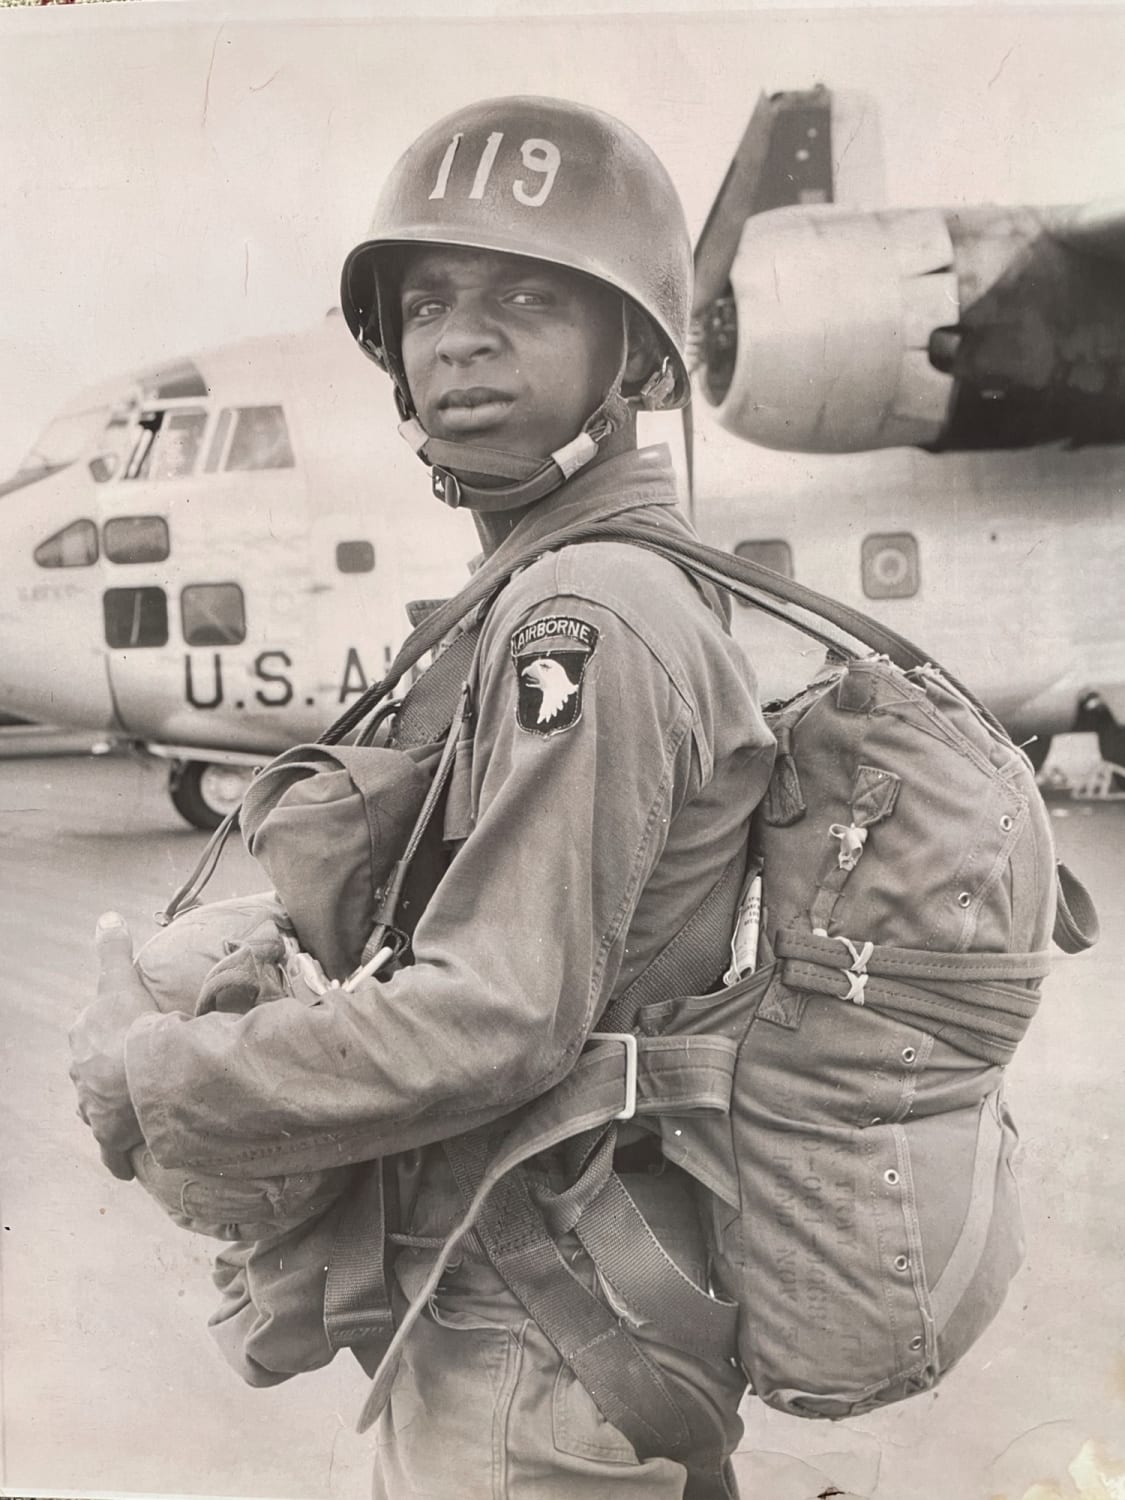 My Grandfather 1967 with the 101st Airborne division